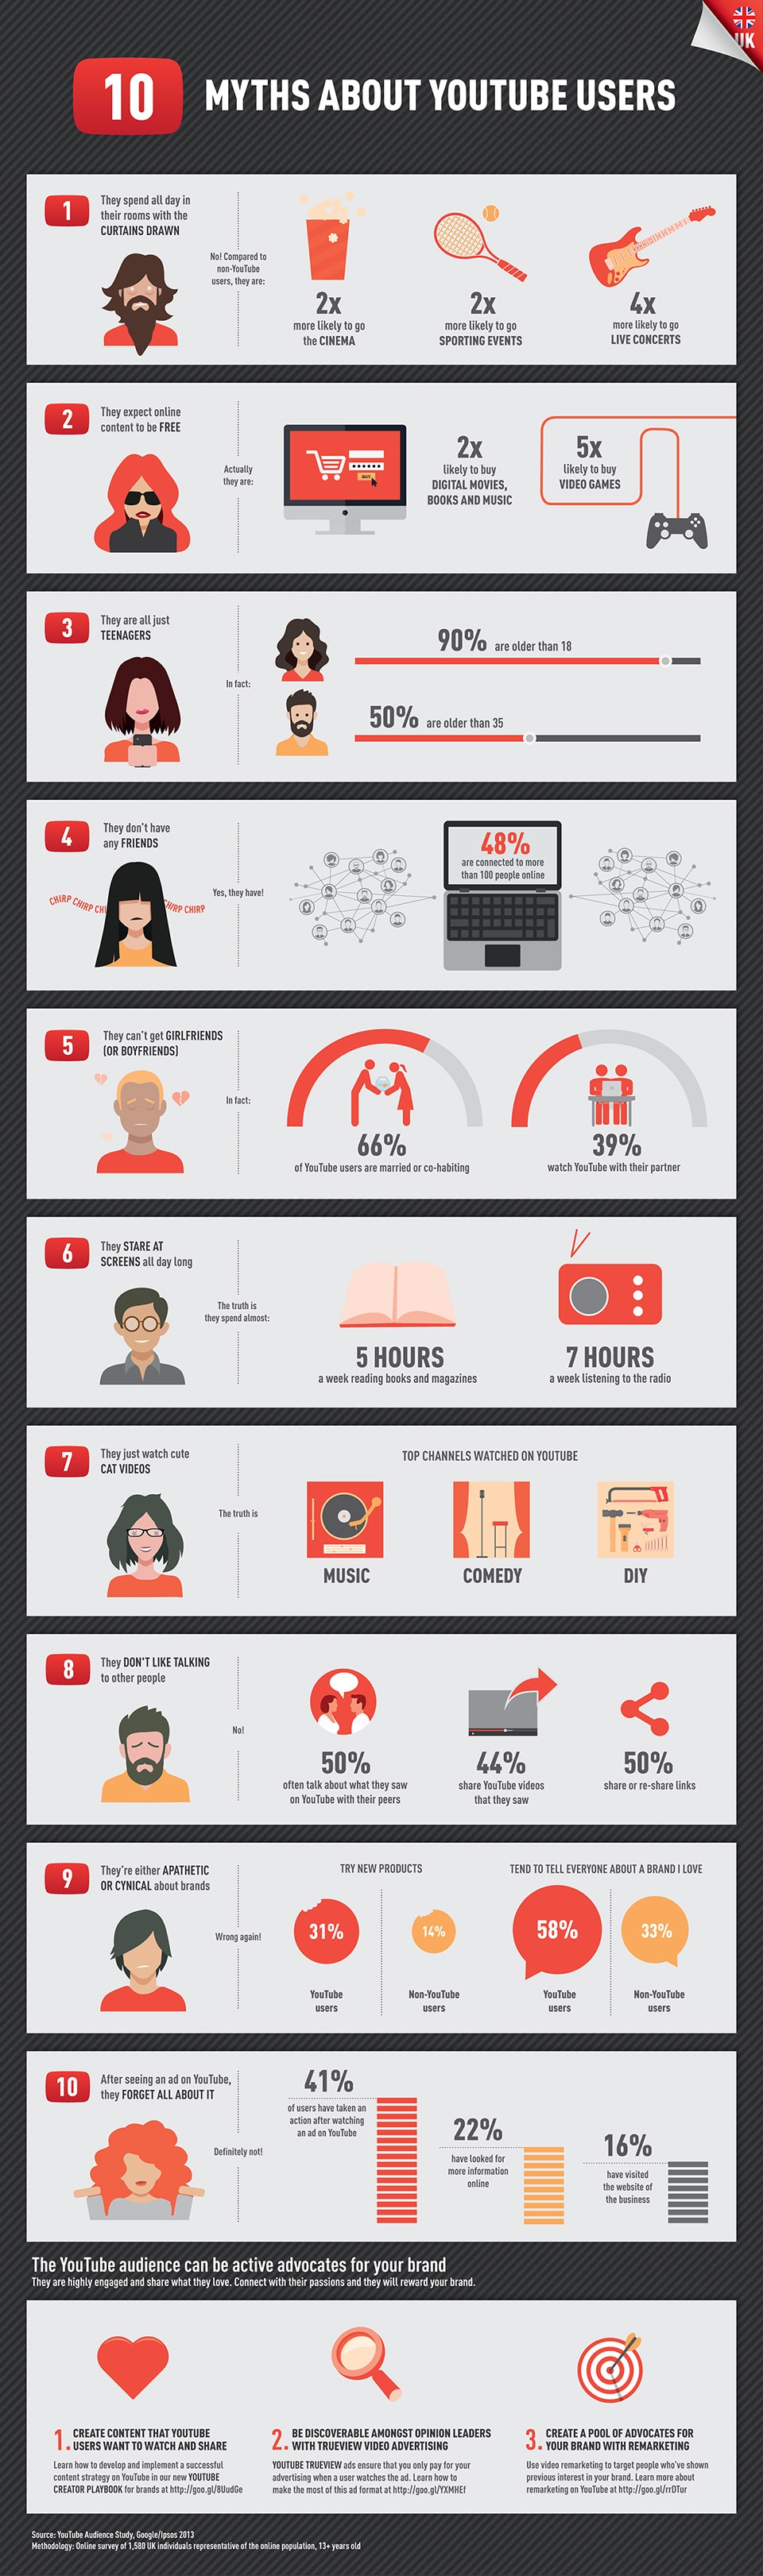 10 Myths About YouTube Users That Are False [Infographic]